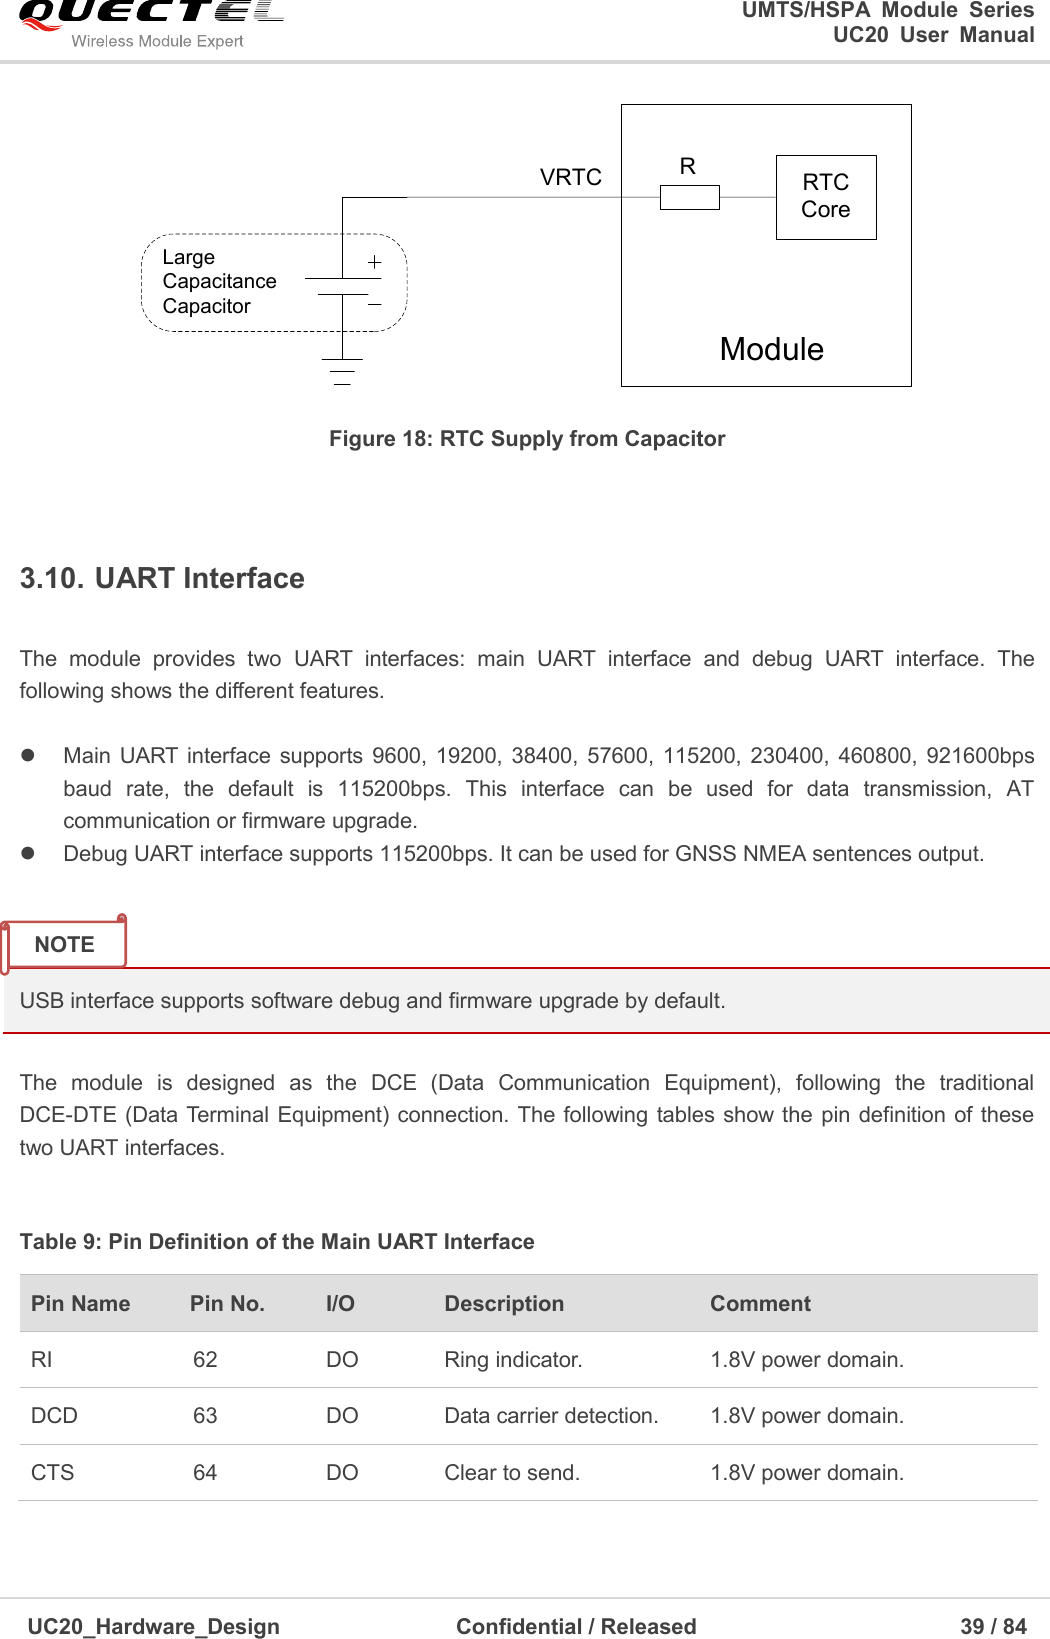                                                                                                                                               UMTS/HSPA  Module  Series                                                                 UC20  User  Manual  UC20_Hardware_Design                  Confidential / Released                            39 / 84     Large Capacitance CapacitorModuleRTC CoreRVRTC Figure 18: RTC Supply from Capacitor  3.10. UART Interface  The  module  provides  two  UART  interfaces:  main  UART  interface  and  debug  UART  interface.  The following shows the different features.    Main  UART  interface  supports 9600, 19200, 38400,  57600, 115200, 230400,  460800, 921600bps baud  rate,  the  default  is  115200bps.  This  interface  can  be  used  for  data  transmission,  AT communication or firmware upgrade.   Debug UART interface supports 115200bps. It can be used for GNSS NMEA sentences output.     USB interface supports software debug and firmware upgrade by default.    The  module  is  designed  as  the  DCE  (Data  Communication  Equipment),  following  the  traditional DCE-DTE (Data Terminal Equipment) connection. The following tables  show the pin definition  of these two UART interfaces.  Table 9: Pin Definition of the Main UART Interface Pin Name   Pin No. I/O Description   Comment RI 62 DO Ring indicator. 1.8V power domain. DCD 63 DO Data carrier detection. 1.8V power domain. CTS 64 DO Clear to send. 1.8V power domain. NOTE 